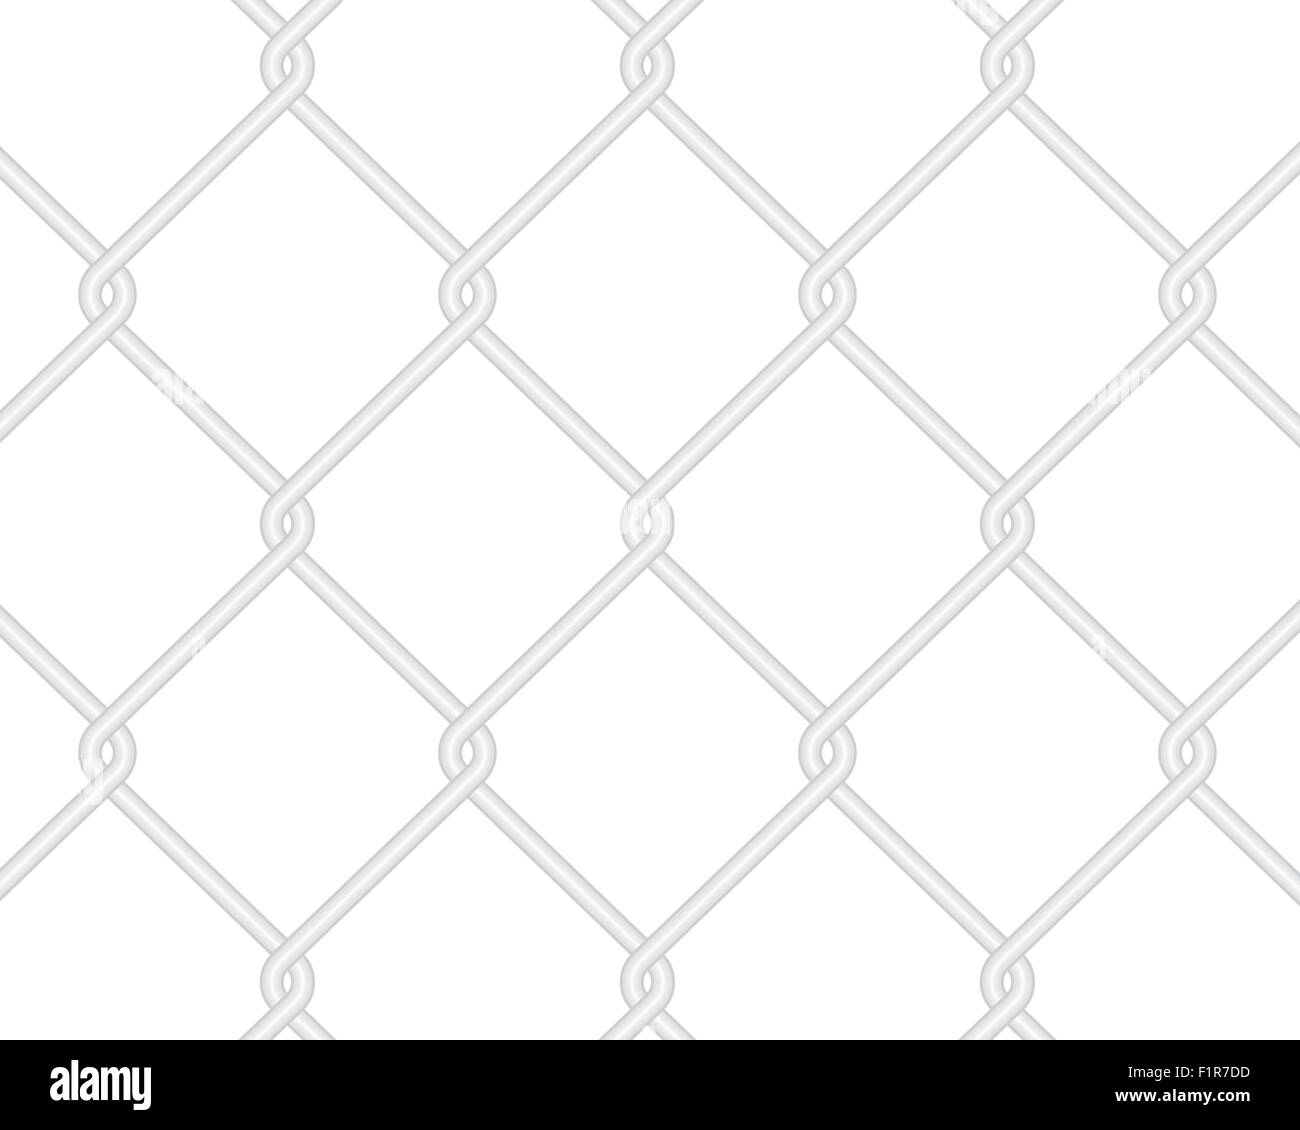 Metallic wire fence background. Vector illustration. Stock Vector